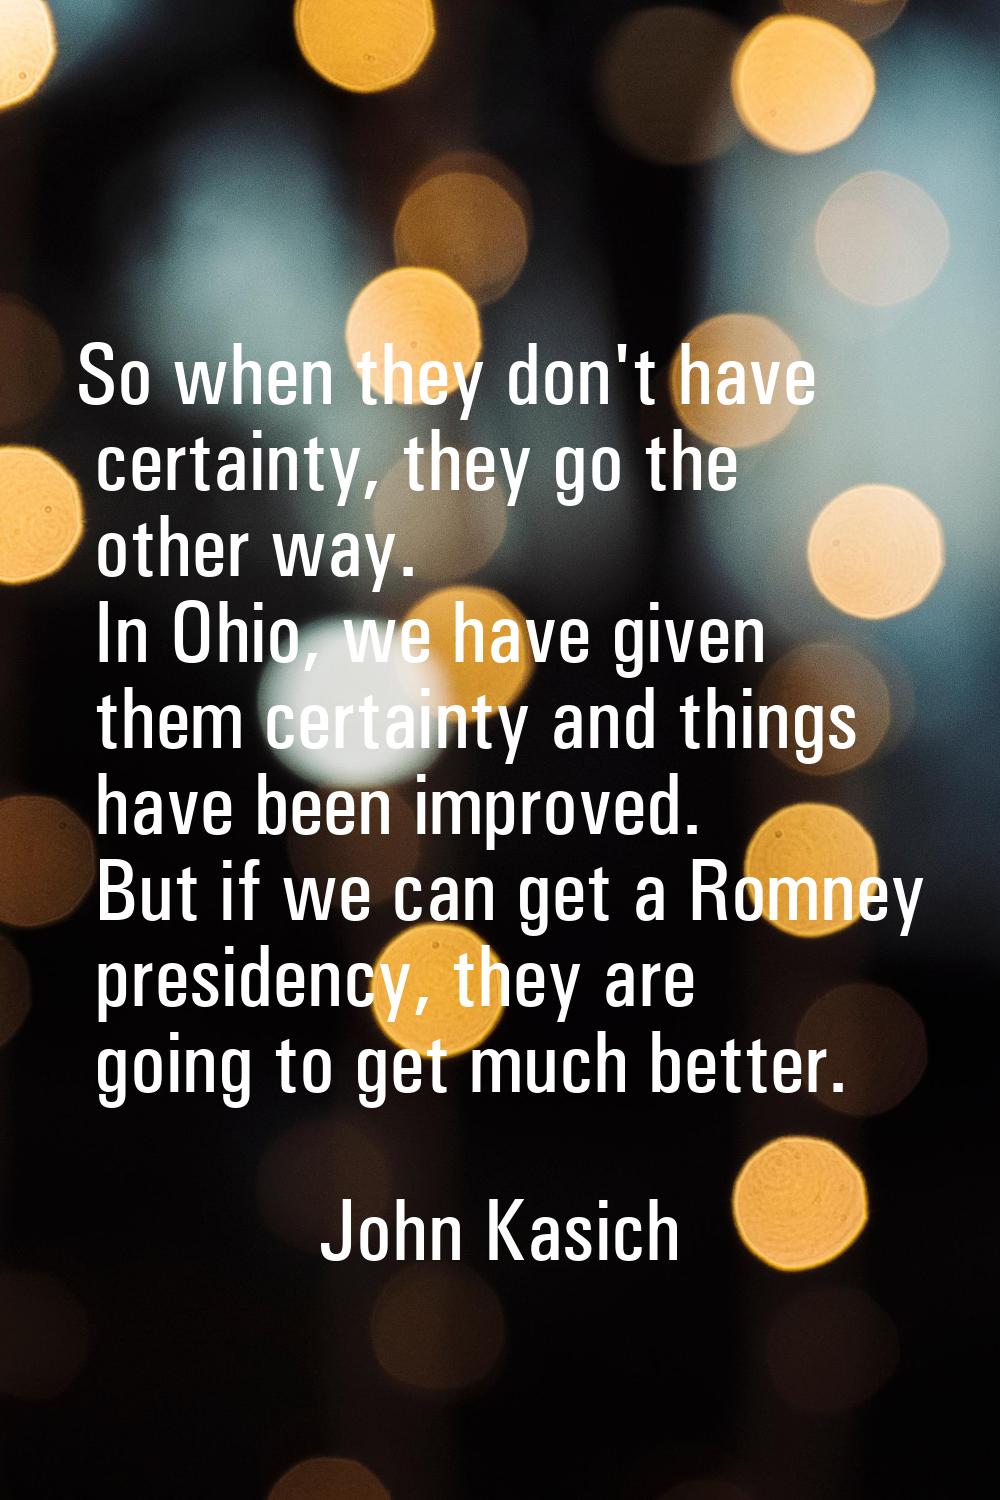 So when they don't have certainty, they go the other way. In Ohio, we have given them certainty and